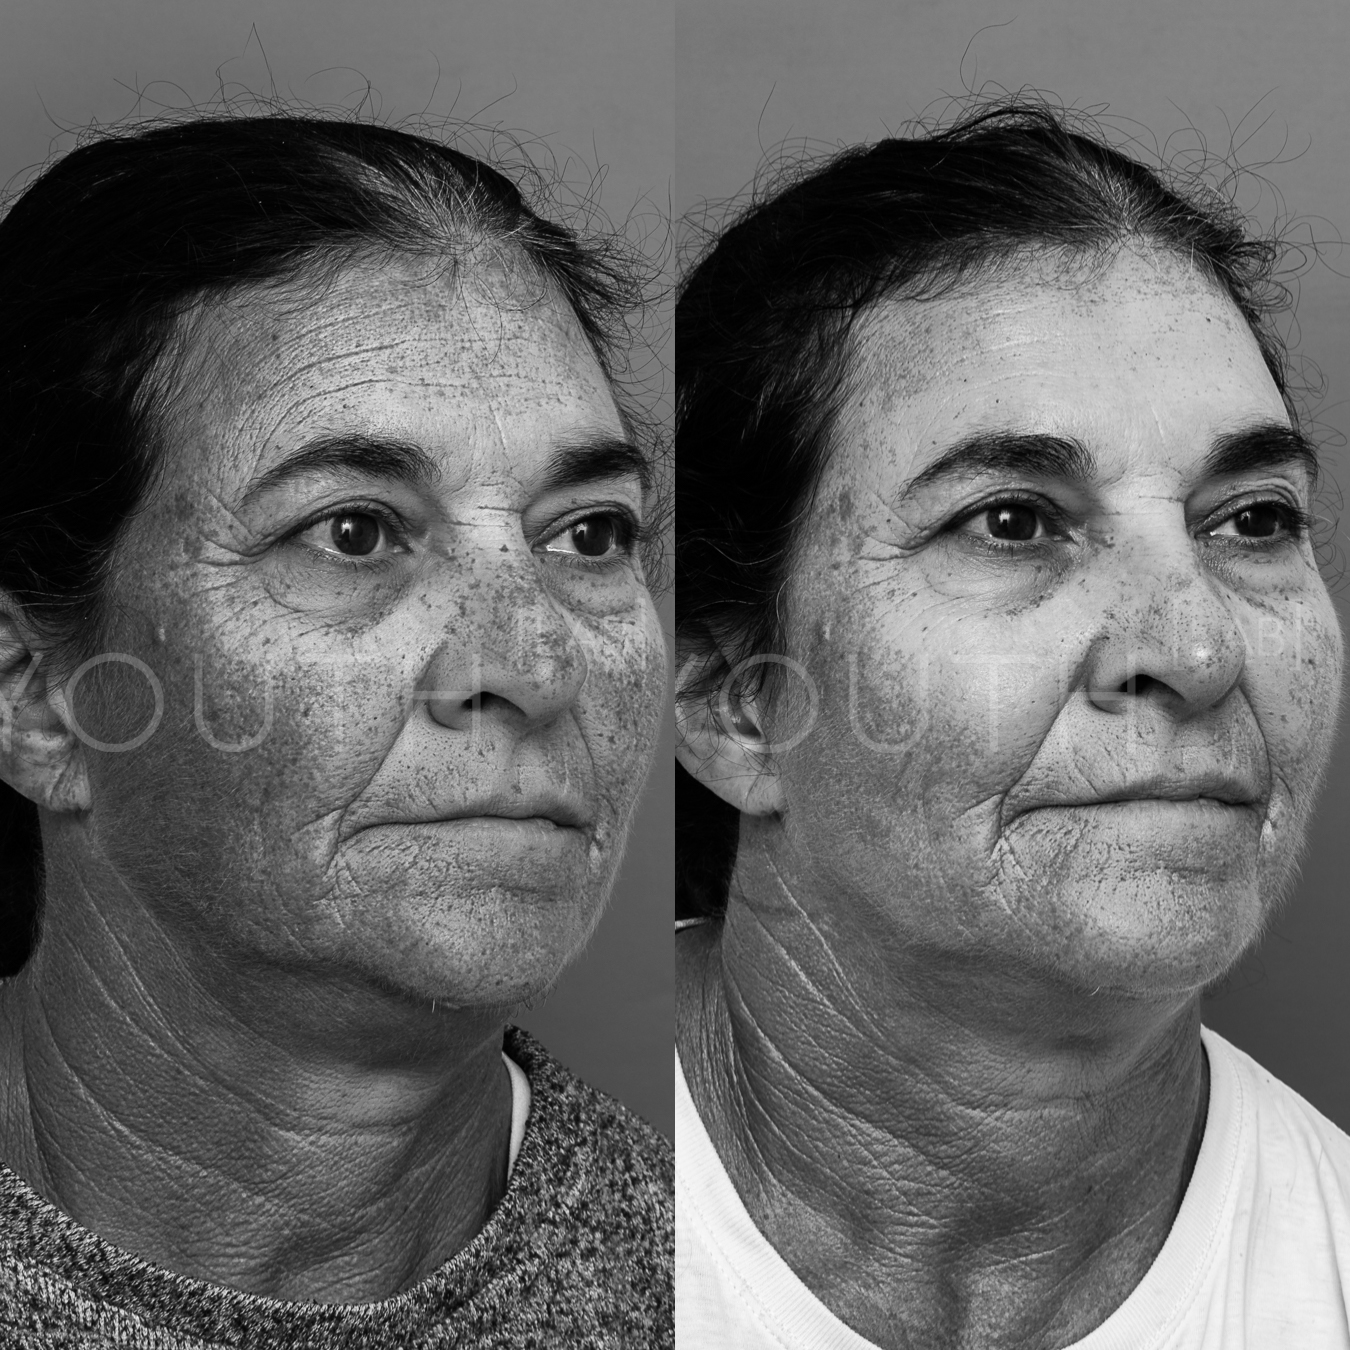 Before and after images of dermal pigmentation following a course of BBL treatment